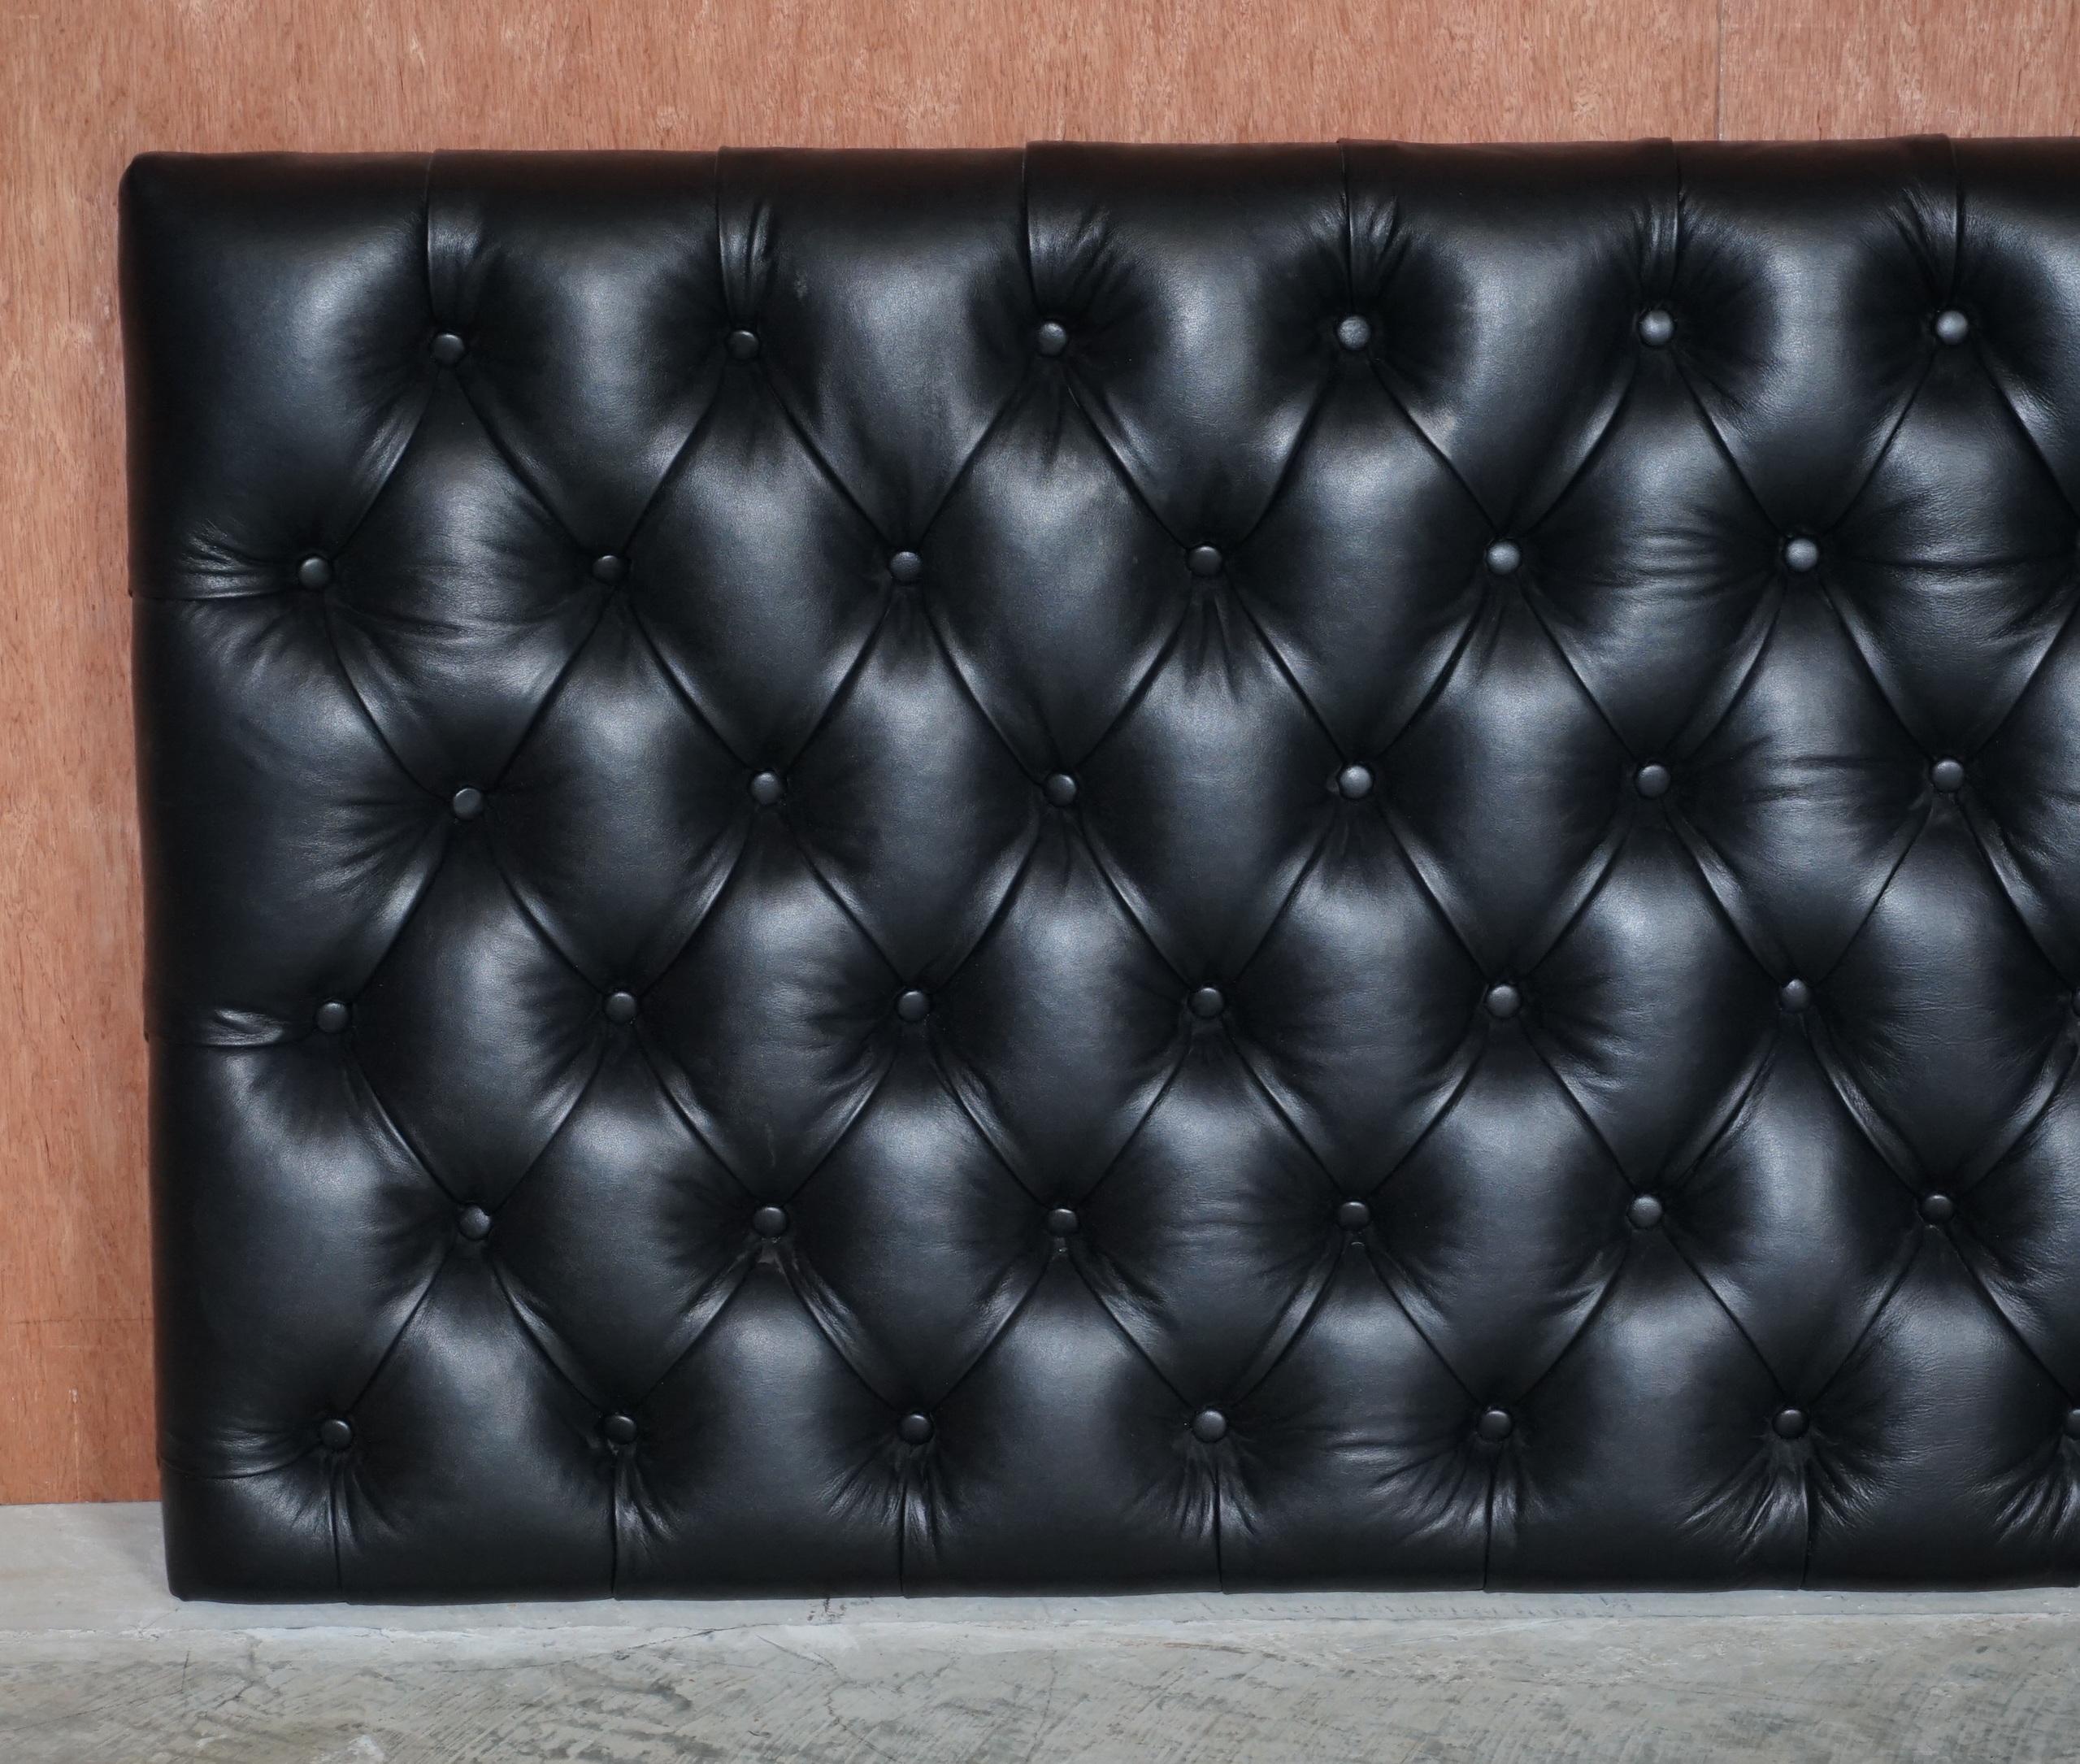 We are delighted to offer this stunning Harrods London black Italian leather Chesterfield tufted king size headboard. 

This headboard is sublime quality and retailed for a small fortune new. It’s designed to sit on a wall mounted slat but it can